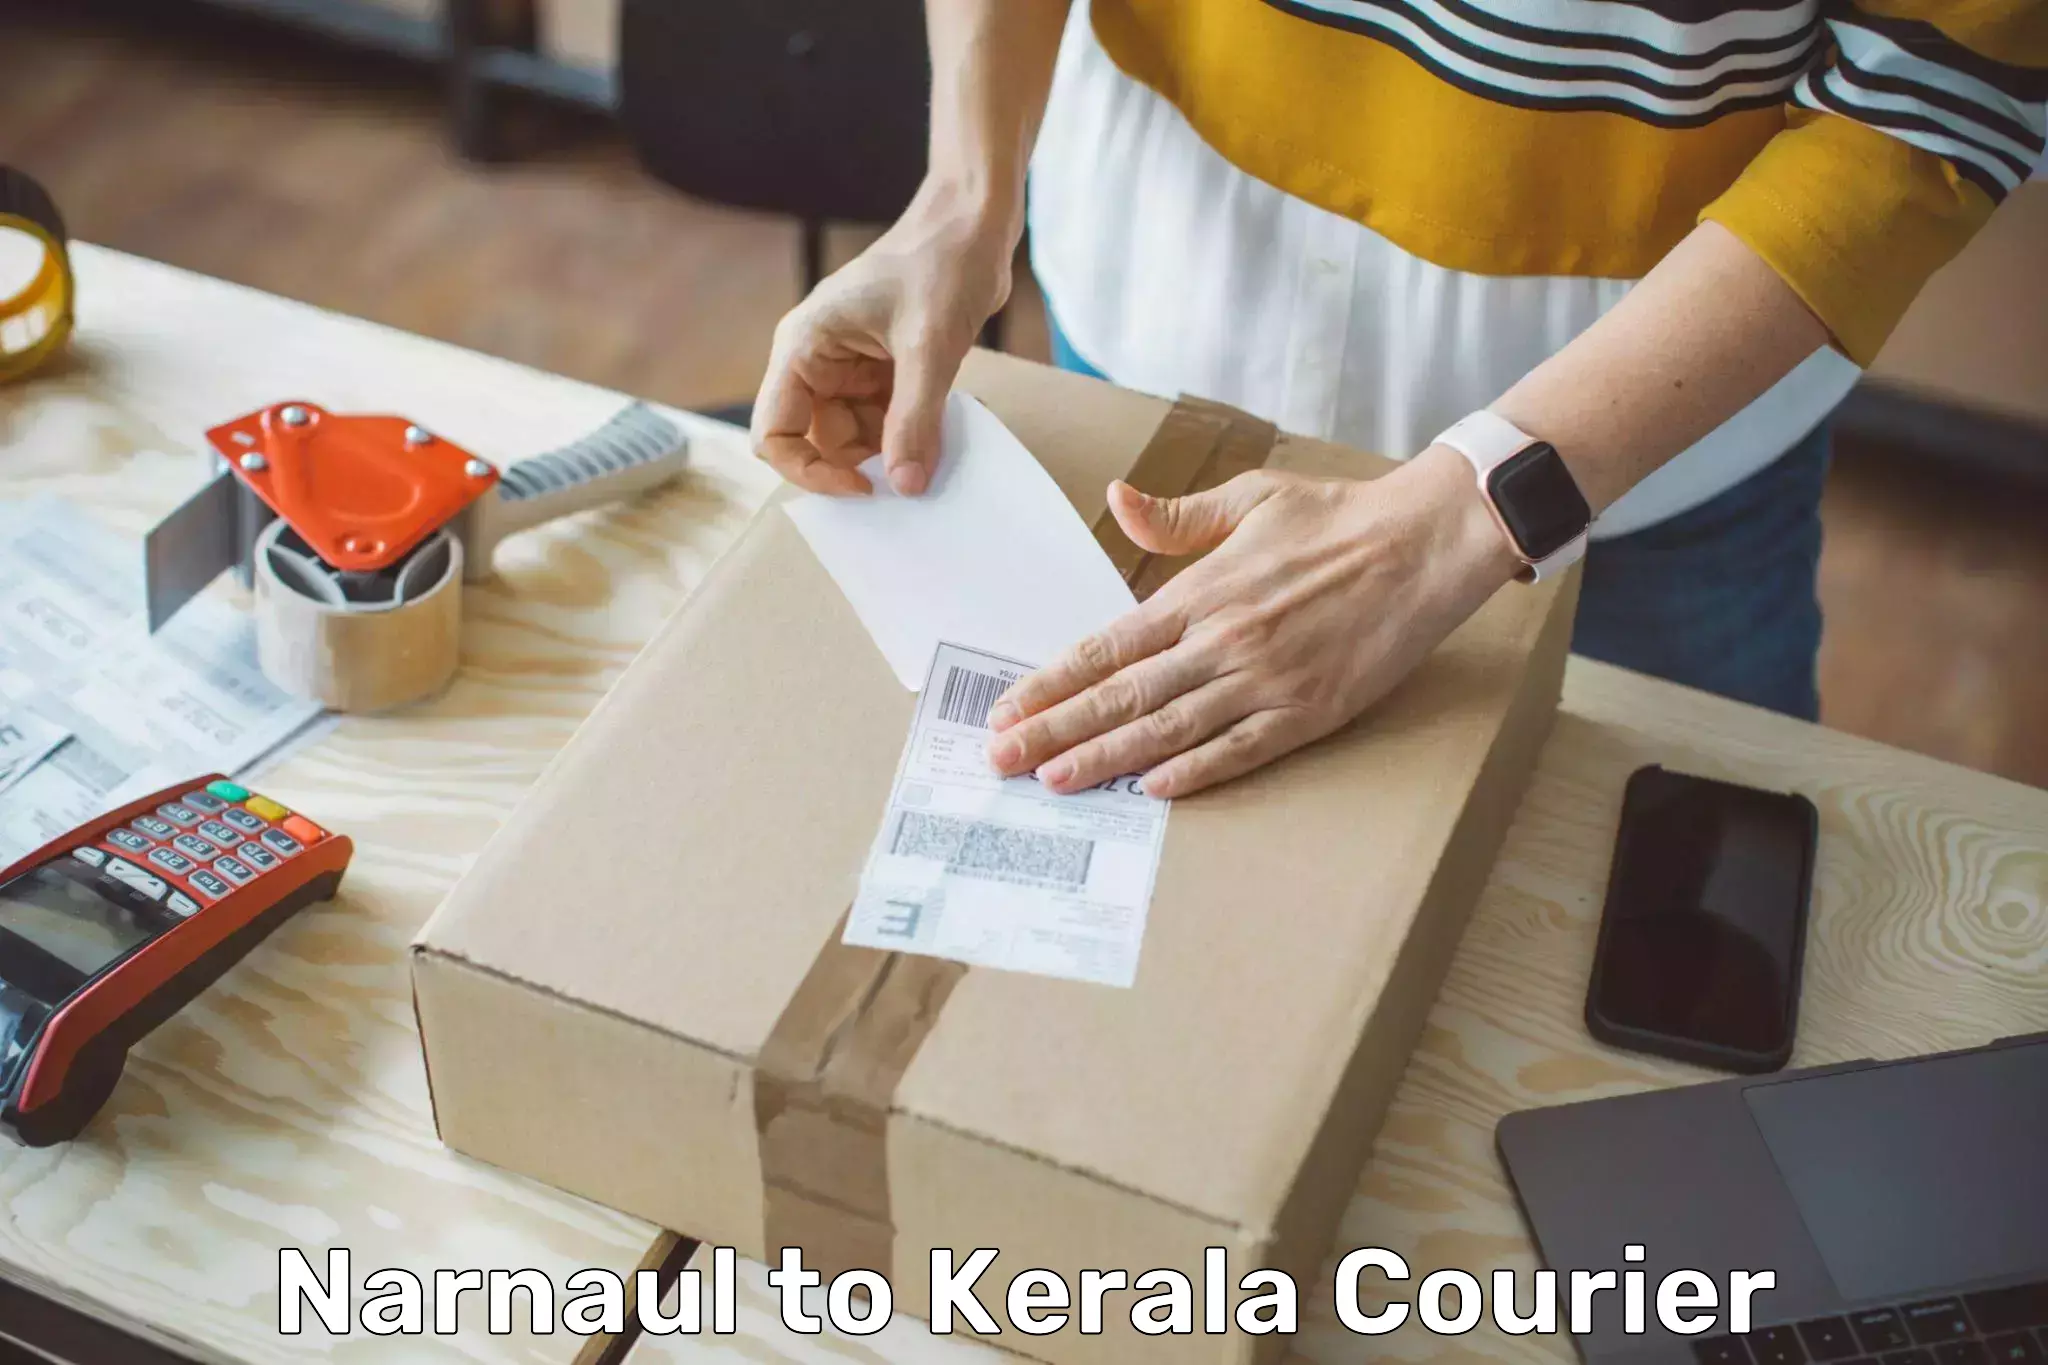 Residential courier service Narnaul to Kerala